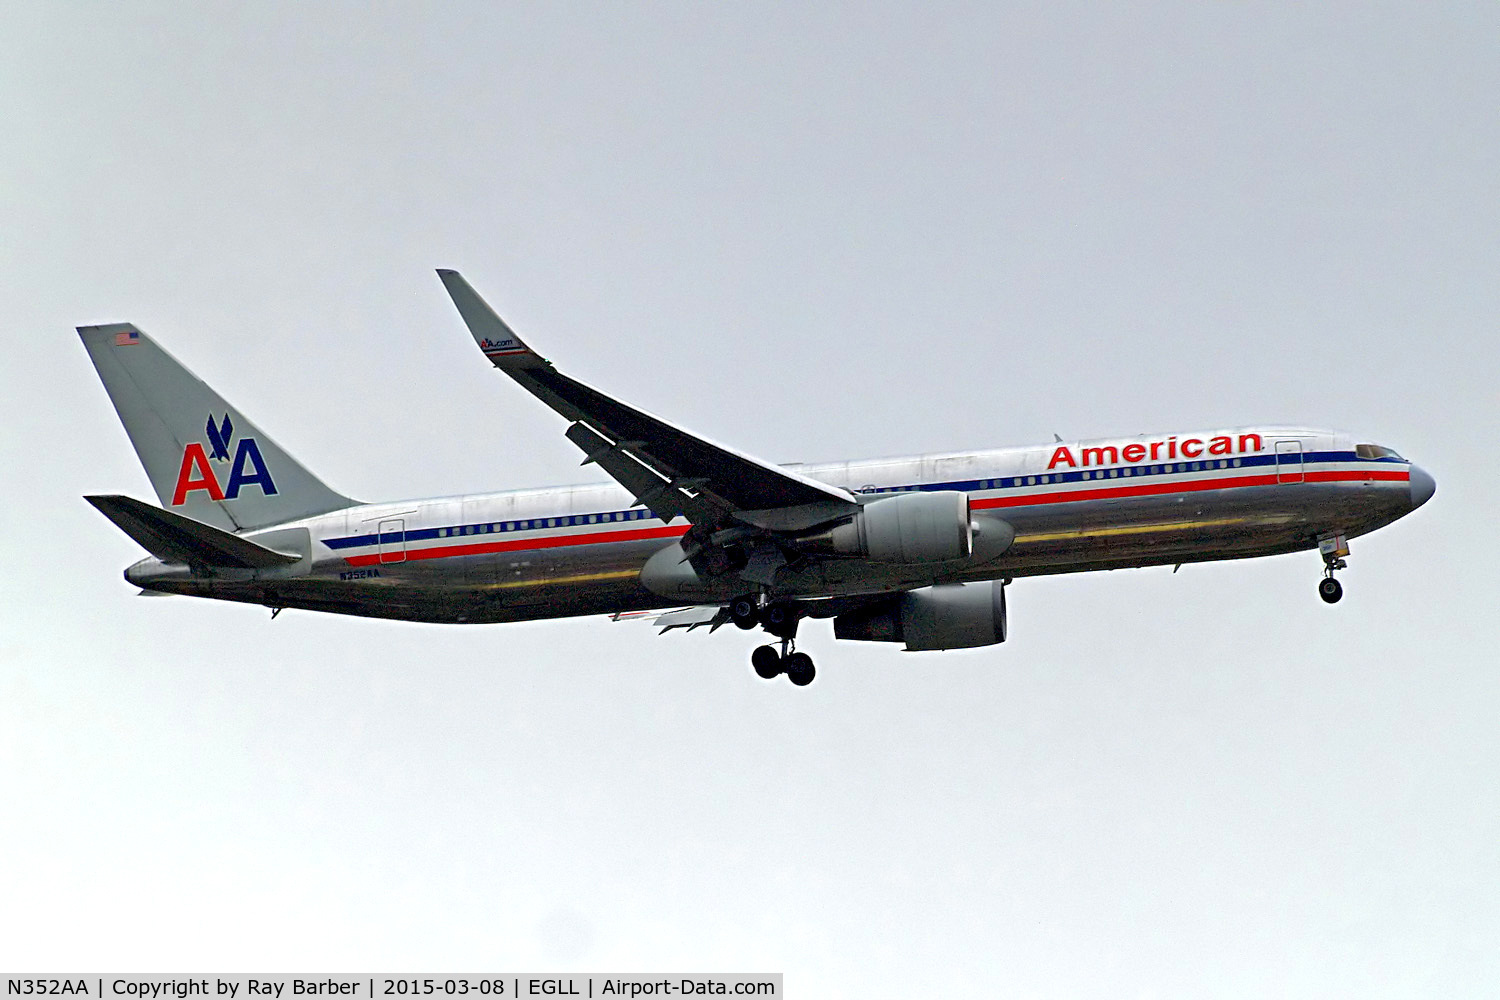 N352AA, 1988 Boeing 767-323ER C/N 24033, Boeing 767-323ER [24033] (American Airlines) Home~G 08/03/2015. On approach 27L.